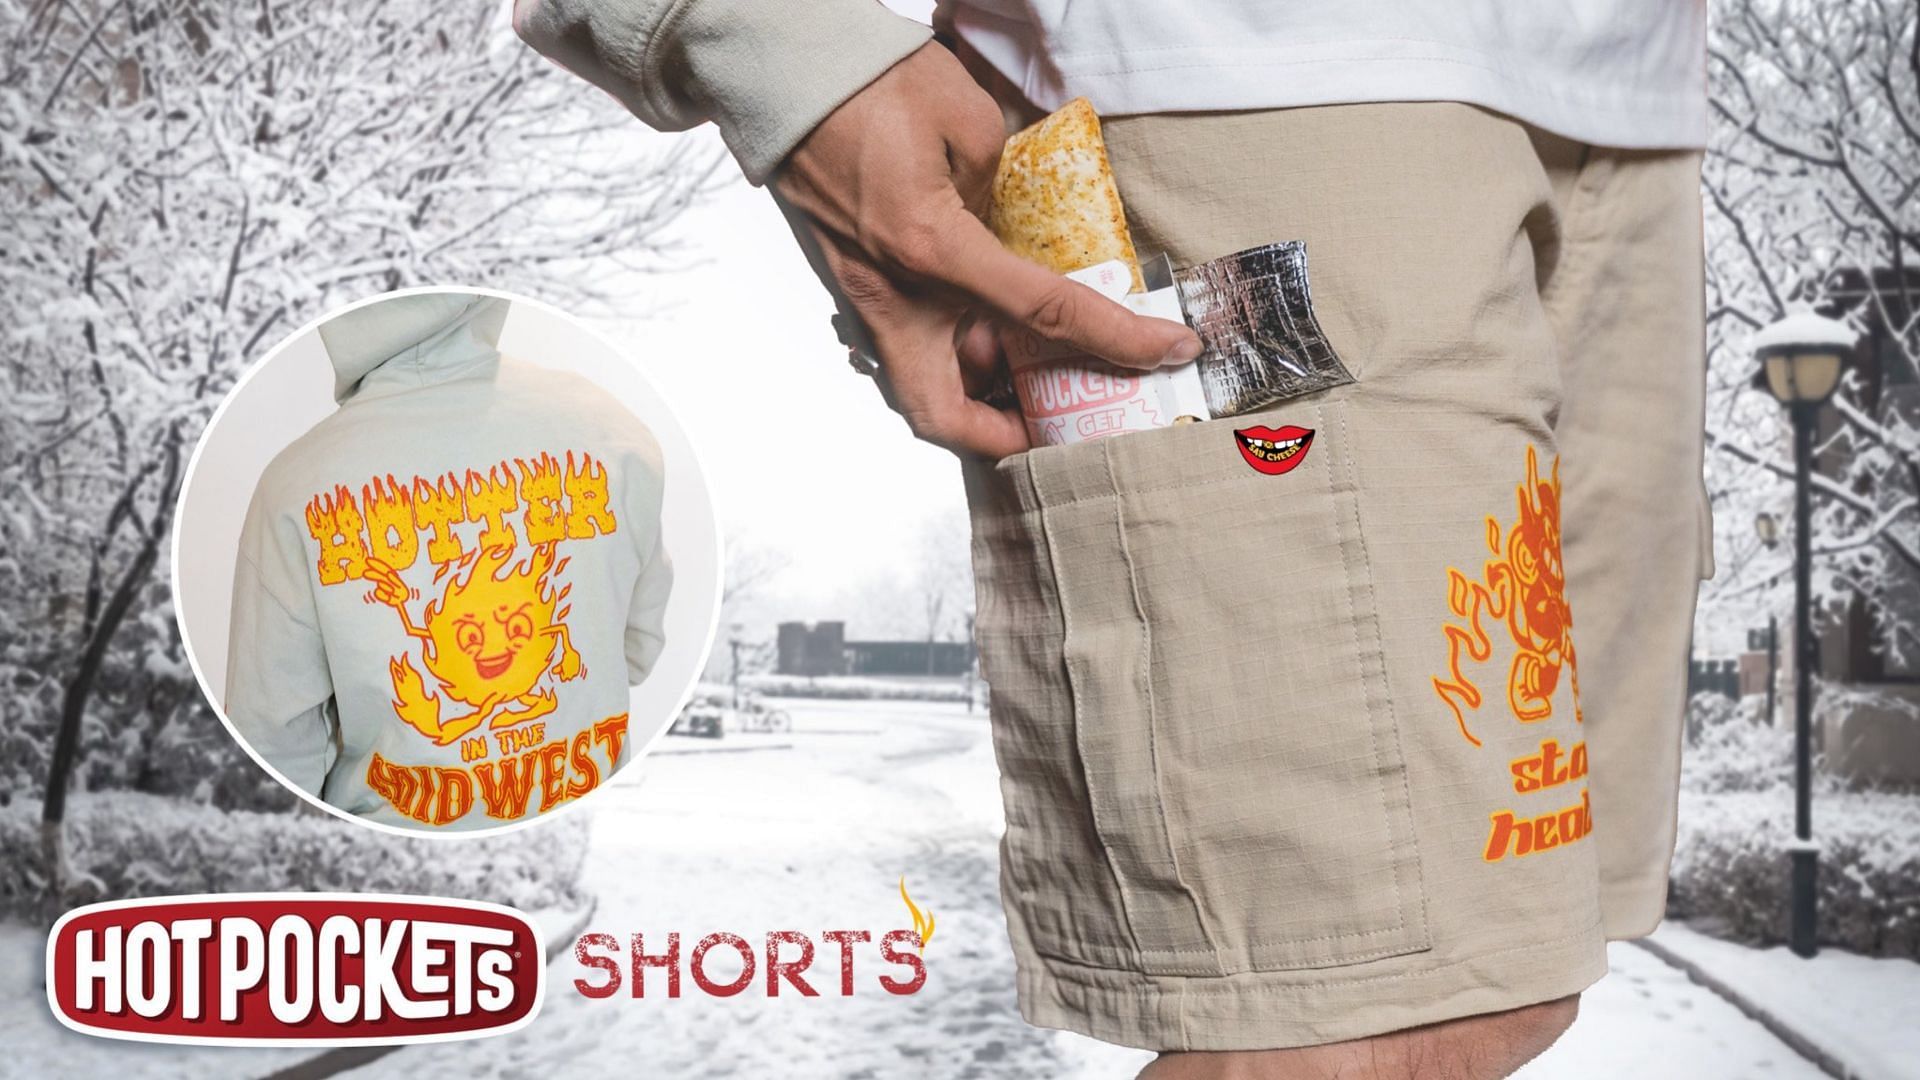 promotional image for the launch of Hot Pockets Cargo Shorts (Image via Hot Pockets)